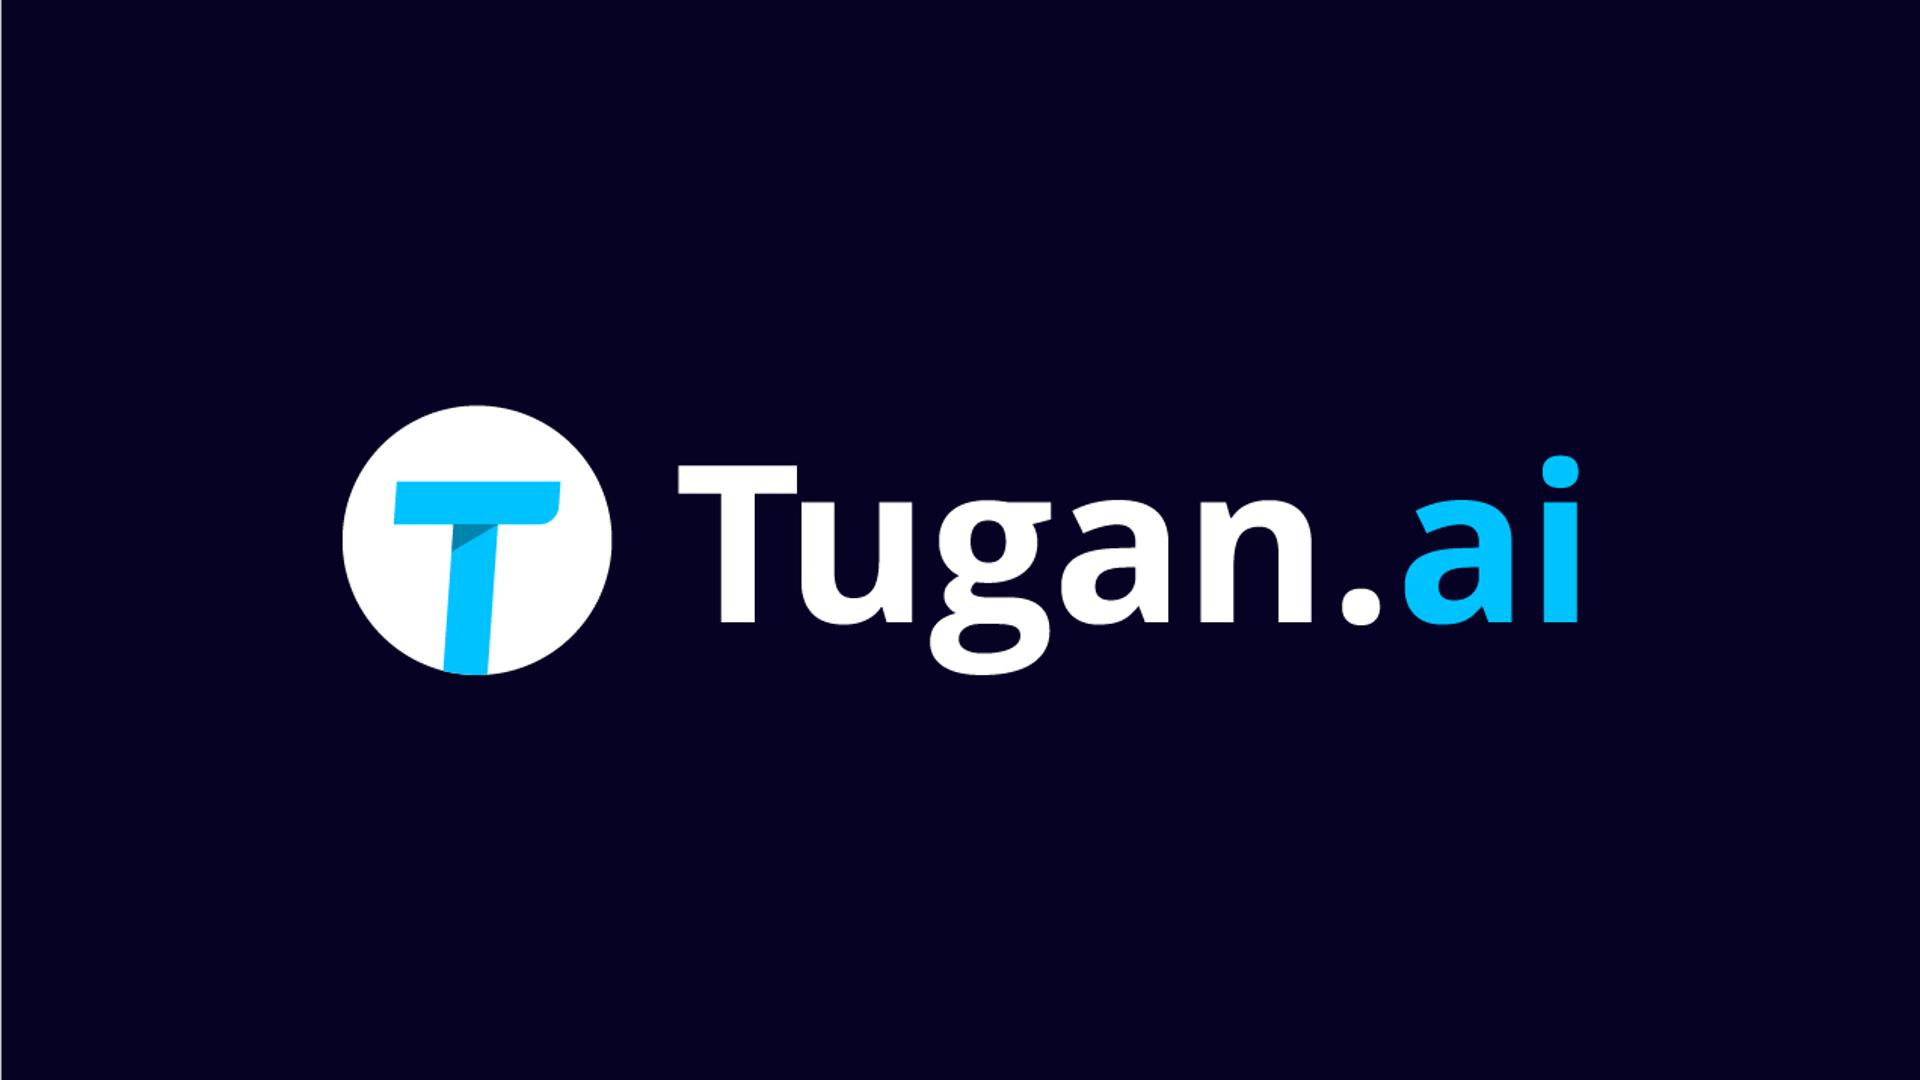 Tugan.ai - A tool for email automation and generate emails